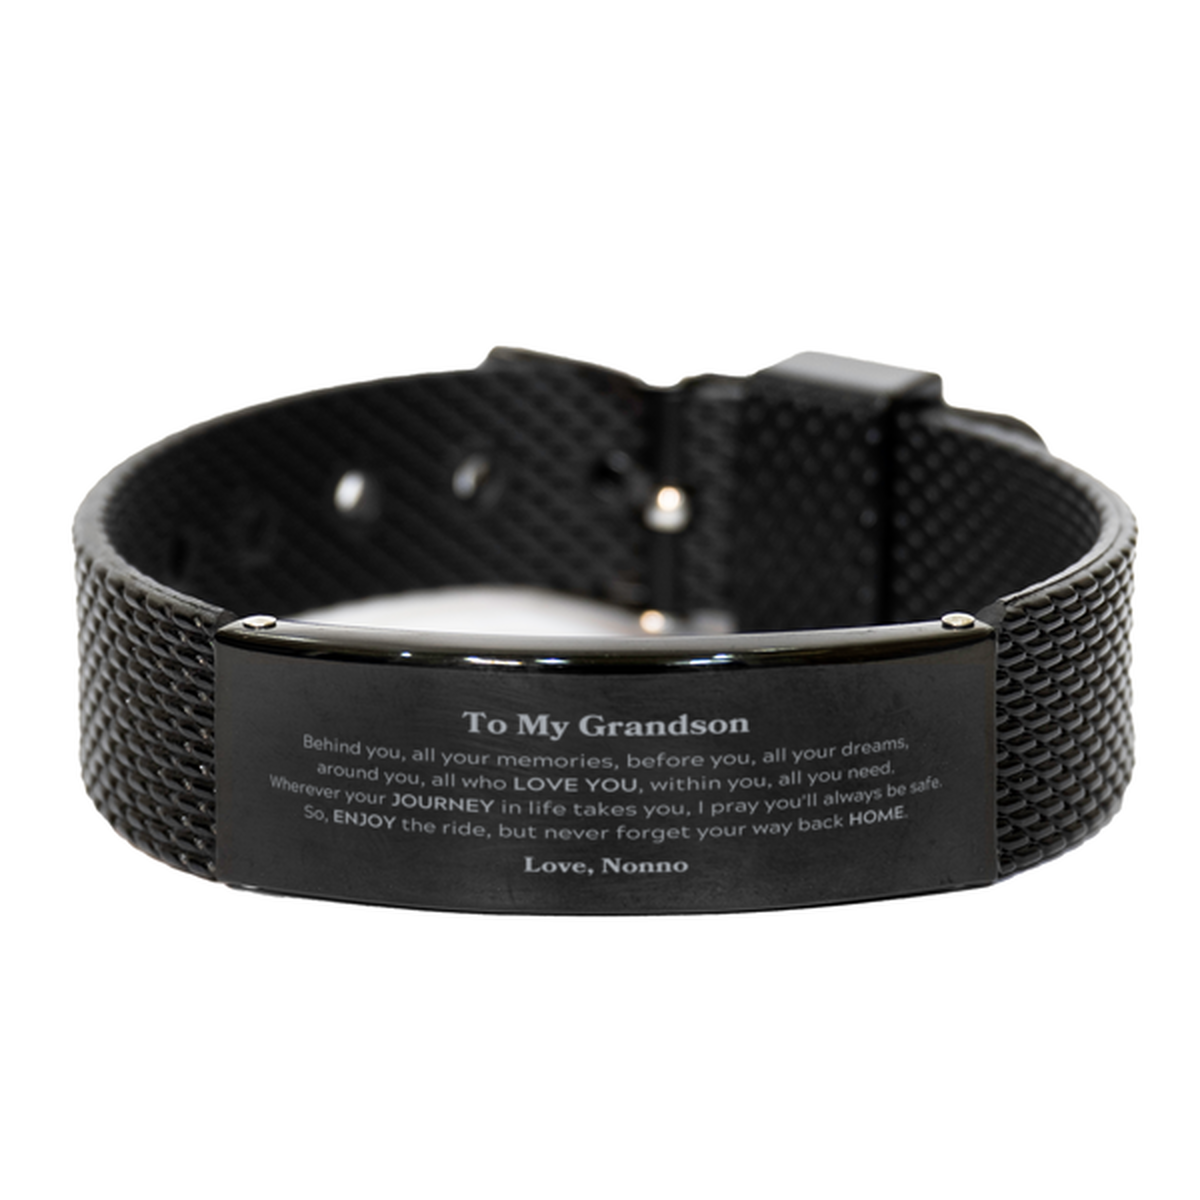 To My Grandson Graduation Gifts from Nonno, Grandson Black Shark Mesh Bracelet Christmas Birthday Gifts for Grandson Behind you, all your memories, before you, all your dreams. Love, Nonno